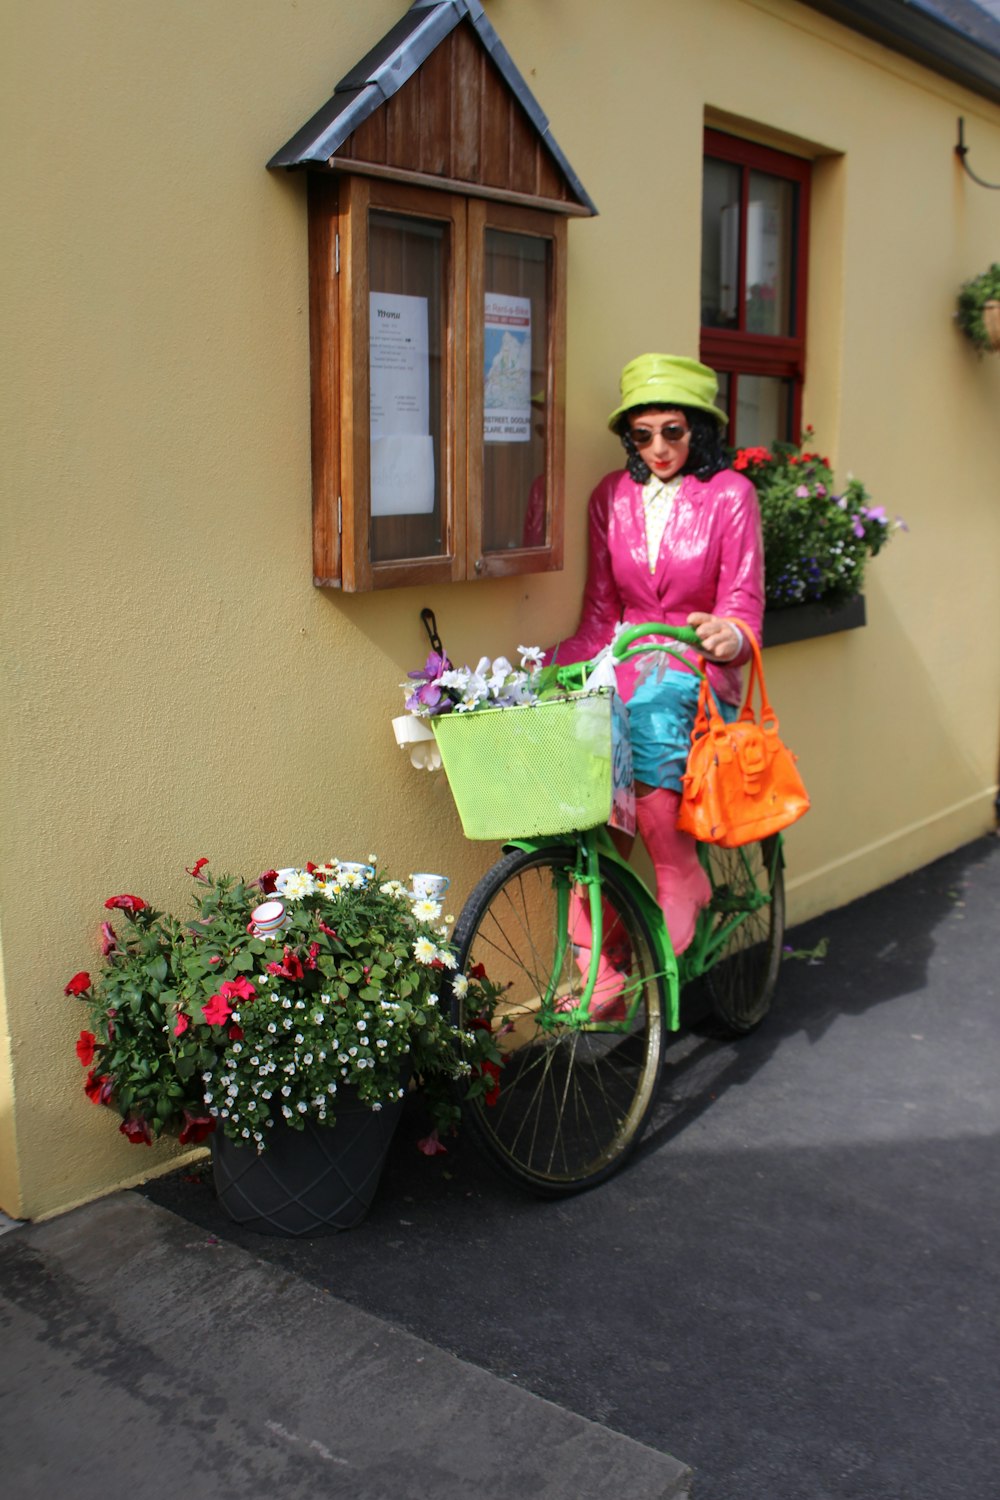 a woman standing next to a bike with flowers in the basket